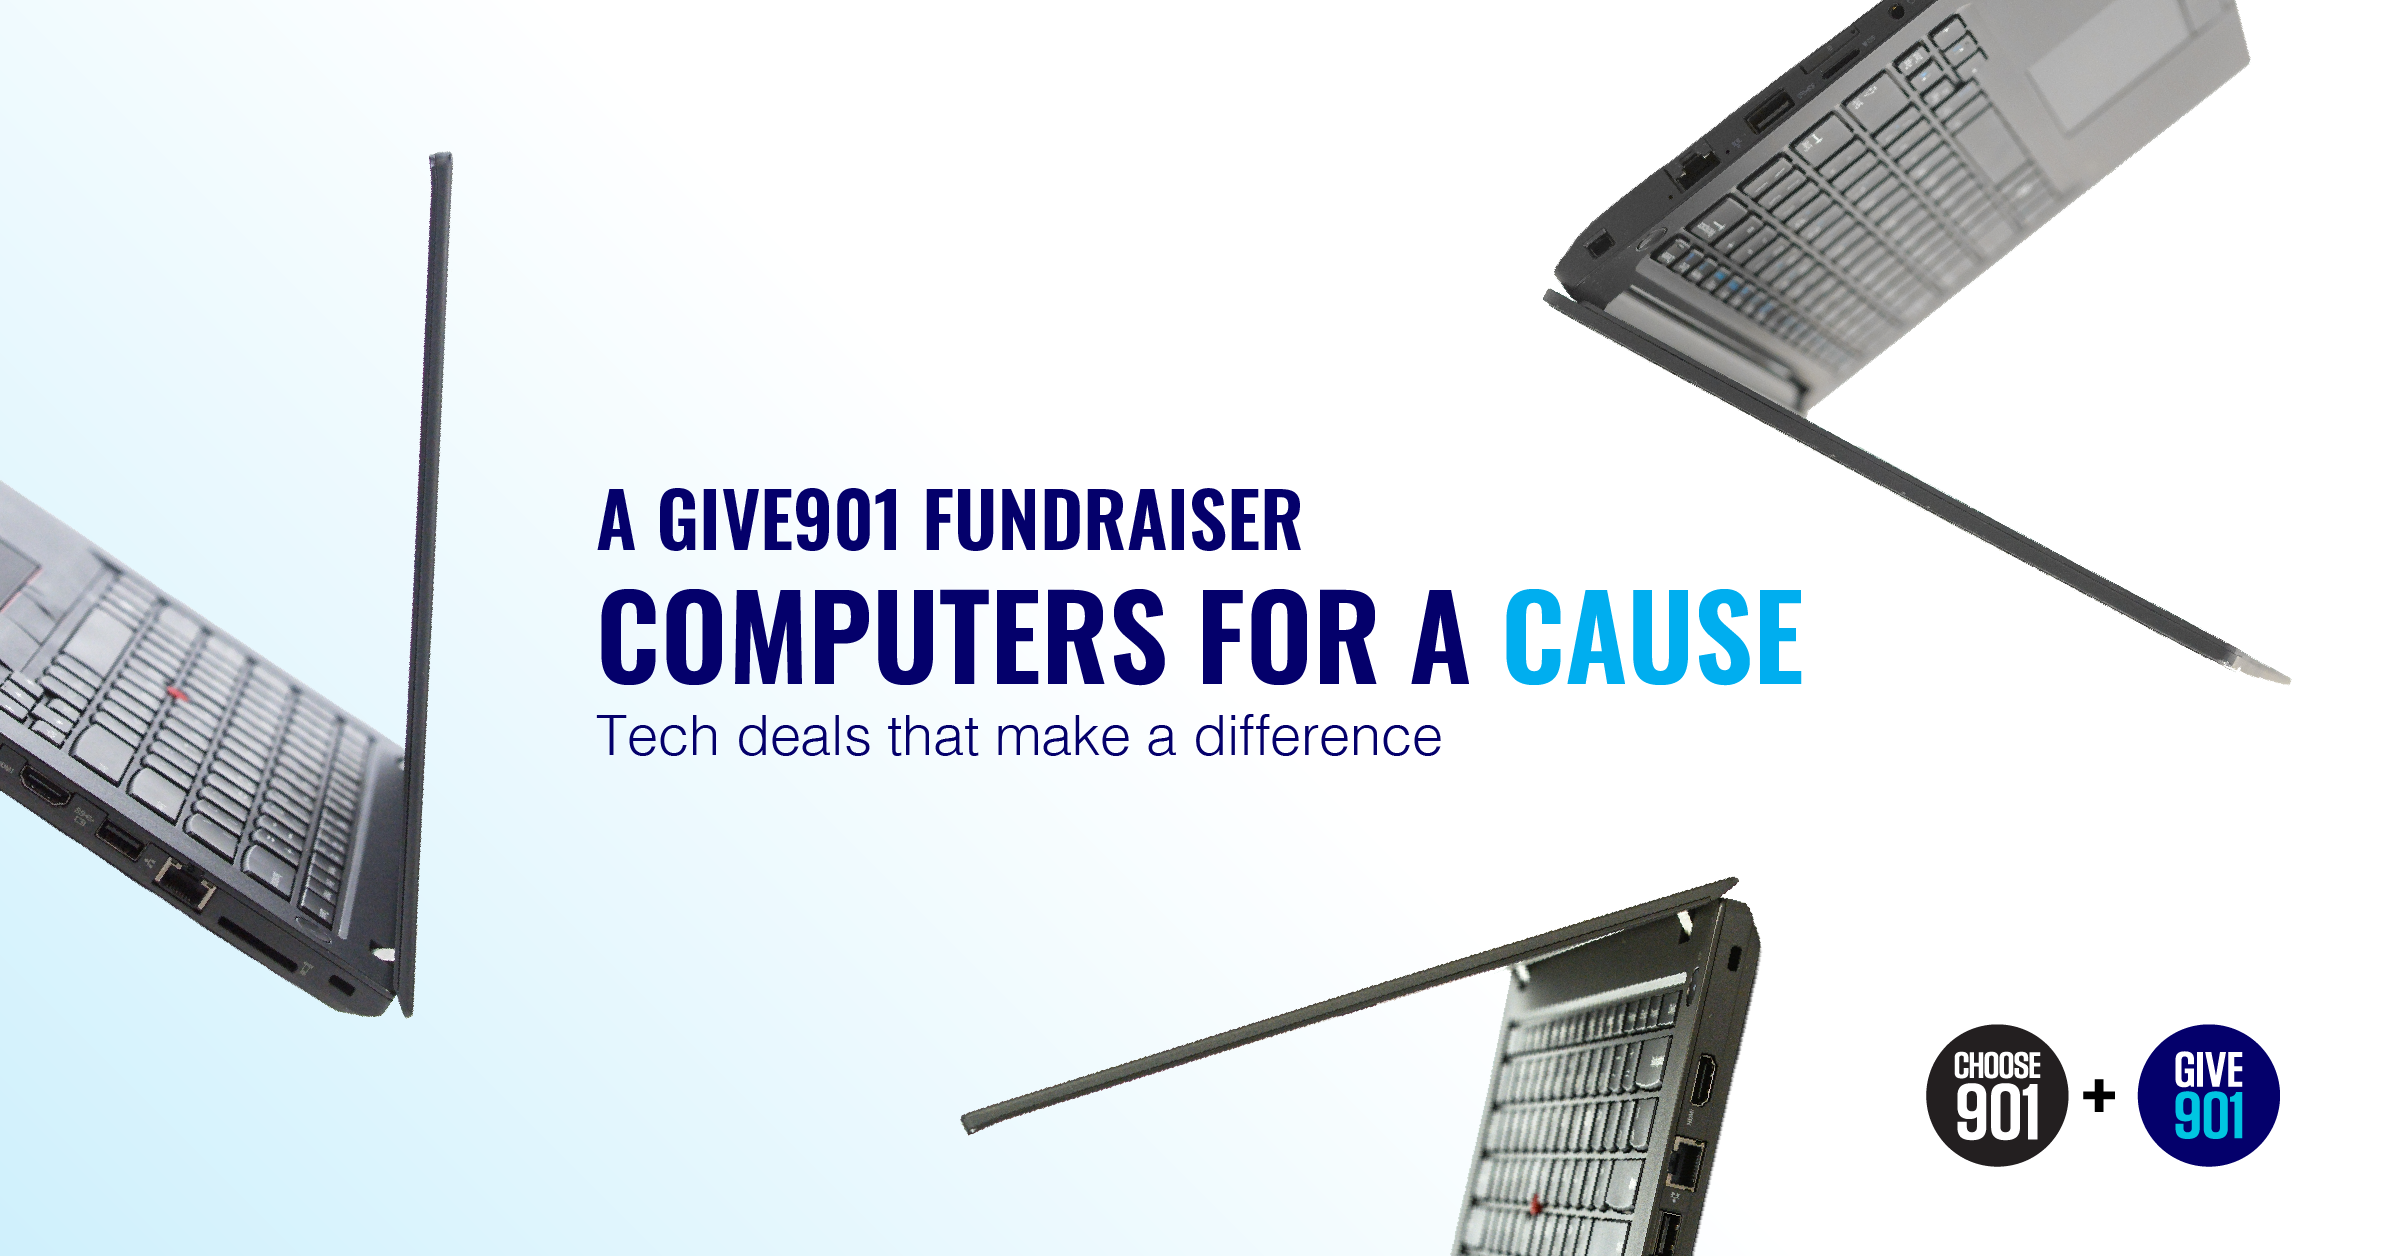 A fundraiser for computers that supports a cause.